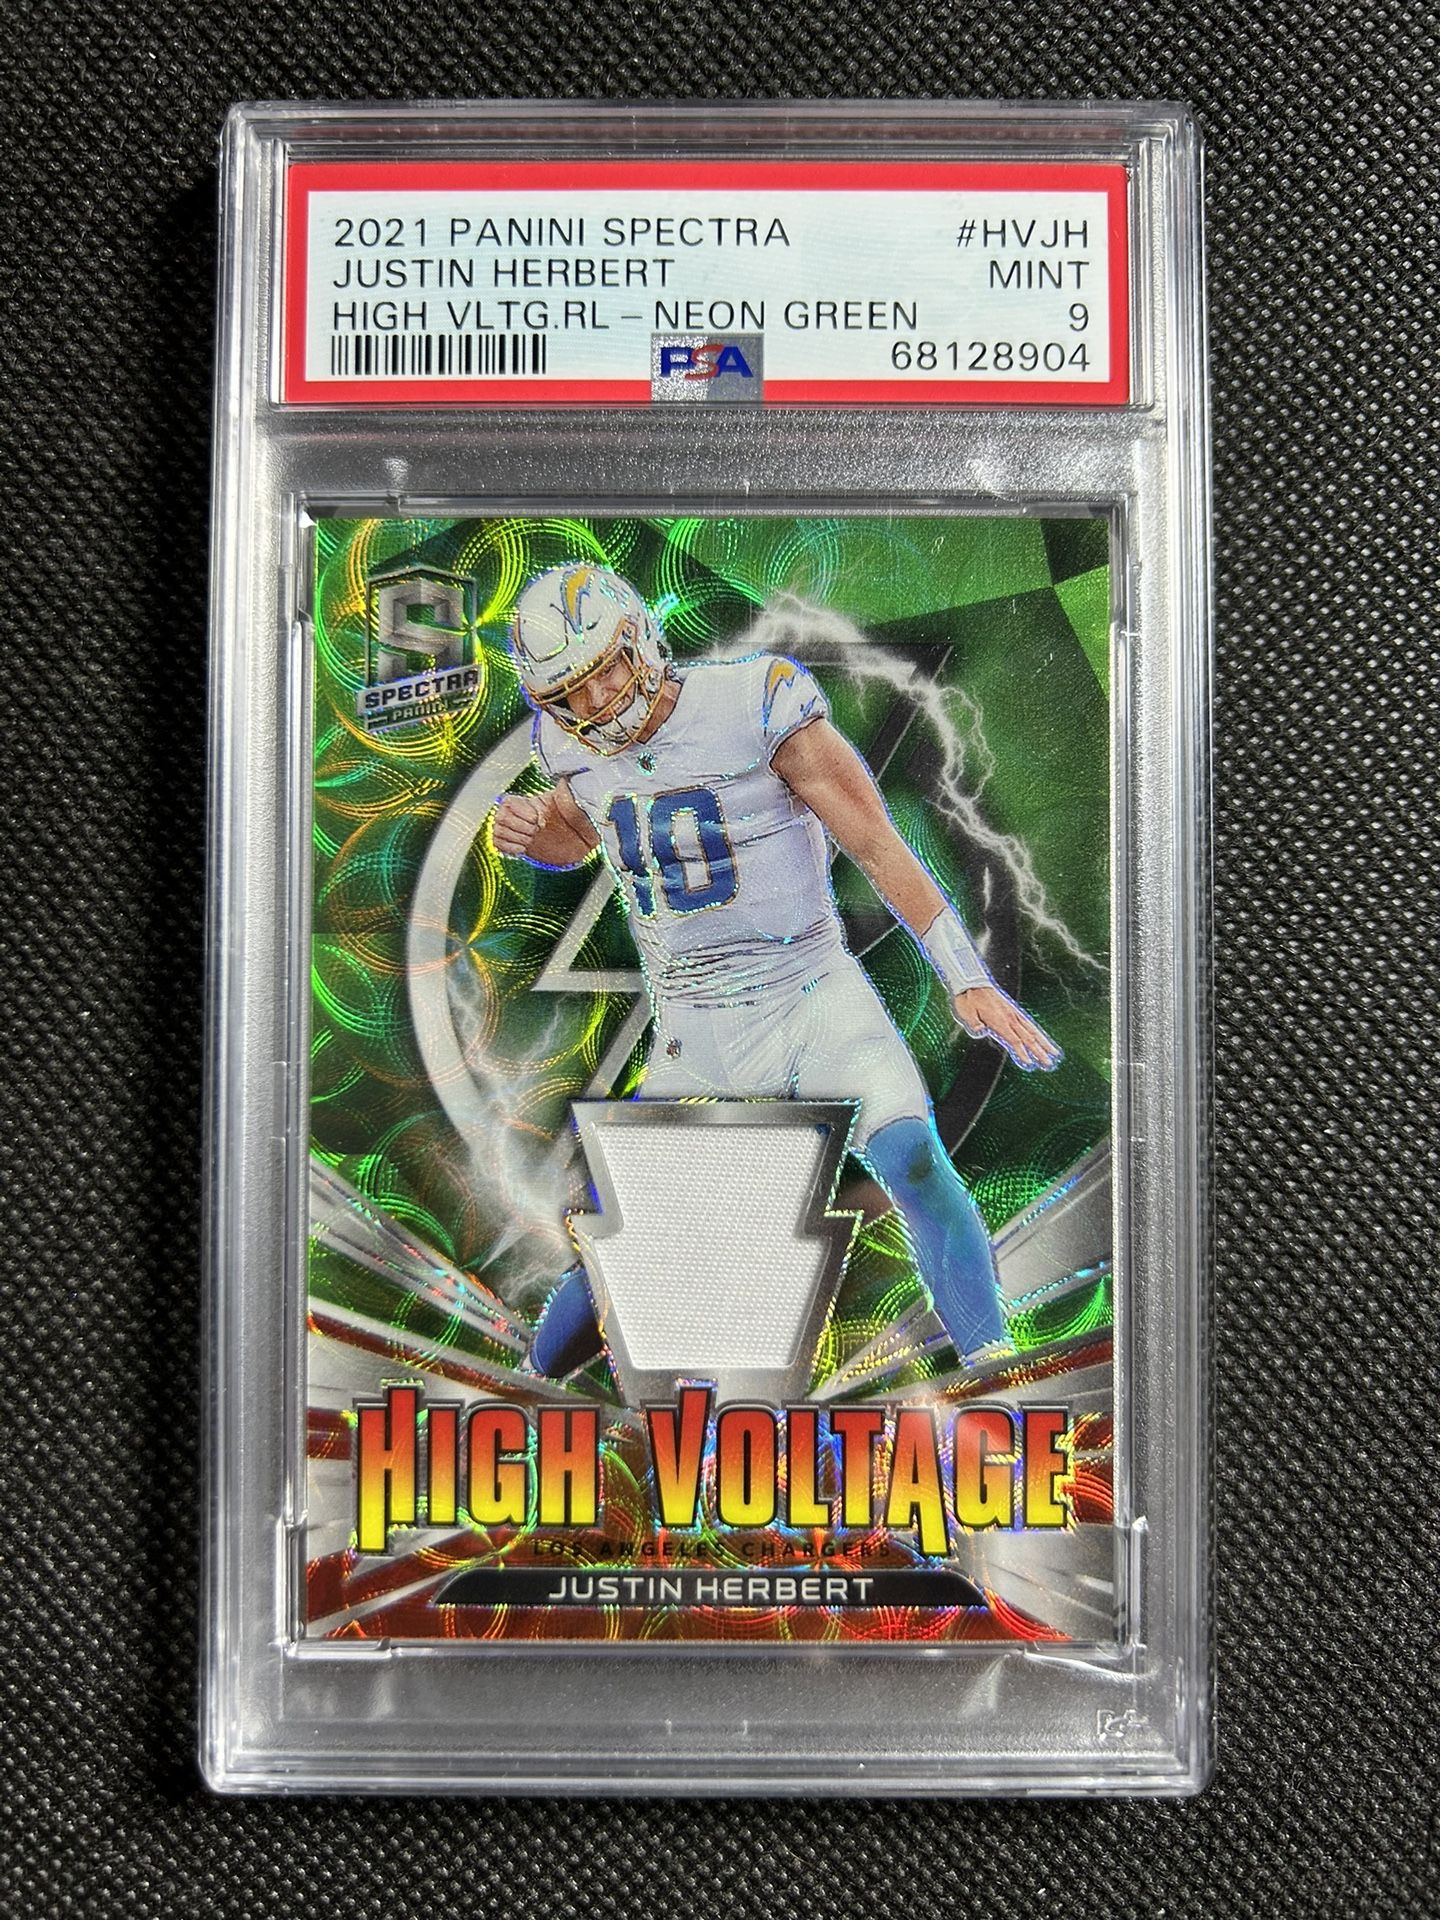 2021 Panini Spectra JUSTIN HERBERT High Voltage PATCH GREEN NEON PRIZM /35 PSA 9 Mint Los Angeles Chargers🔥🔥🔥